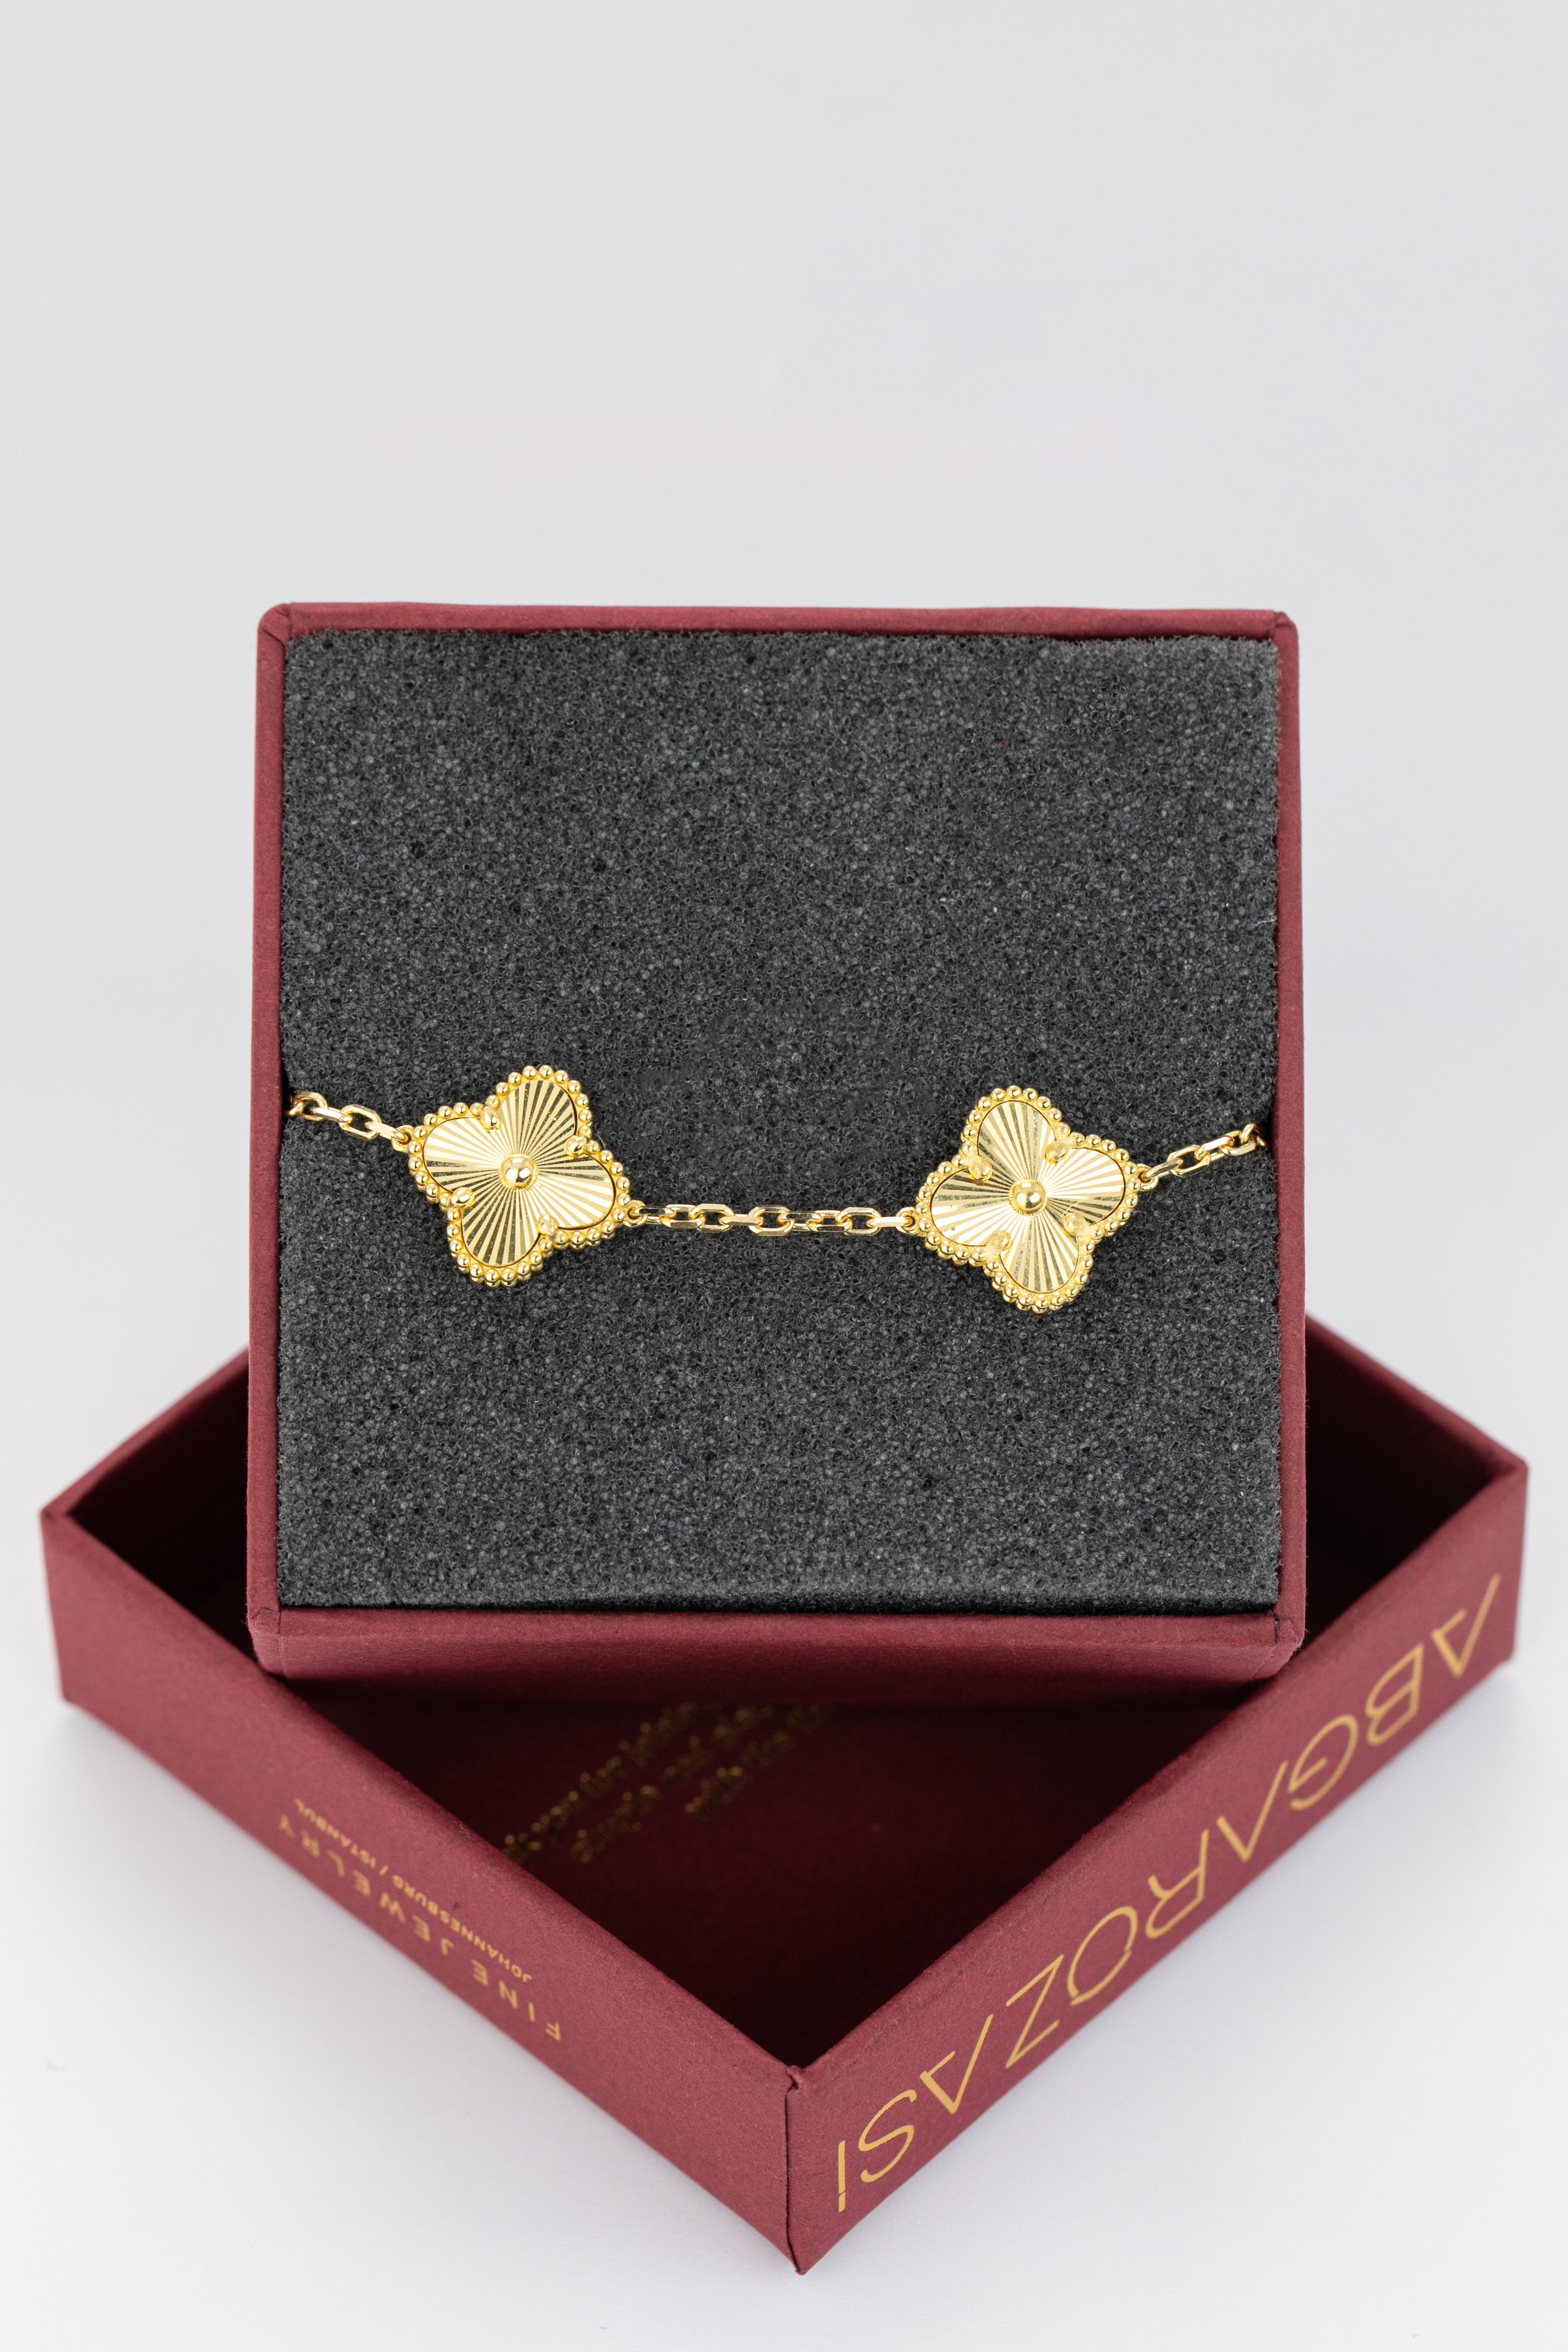 18K Gold Bracelet with Bold Chain, 18K Gold Chain Bracelet, Rectangle Bracelet delicate bracelet created by hands from chain to the stone shapes. Good ideas of dainty bracelet or stackable bracelet gift for her.

This bracelet was made with quality